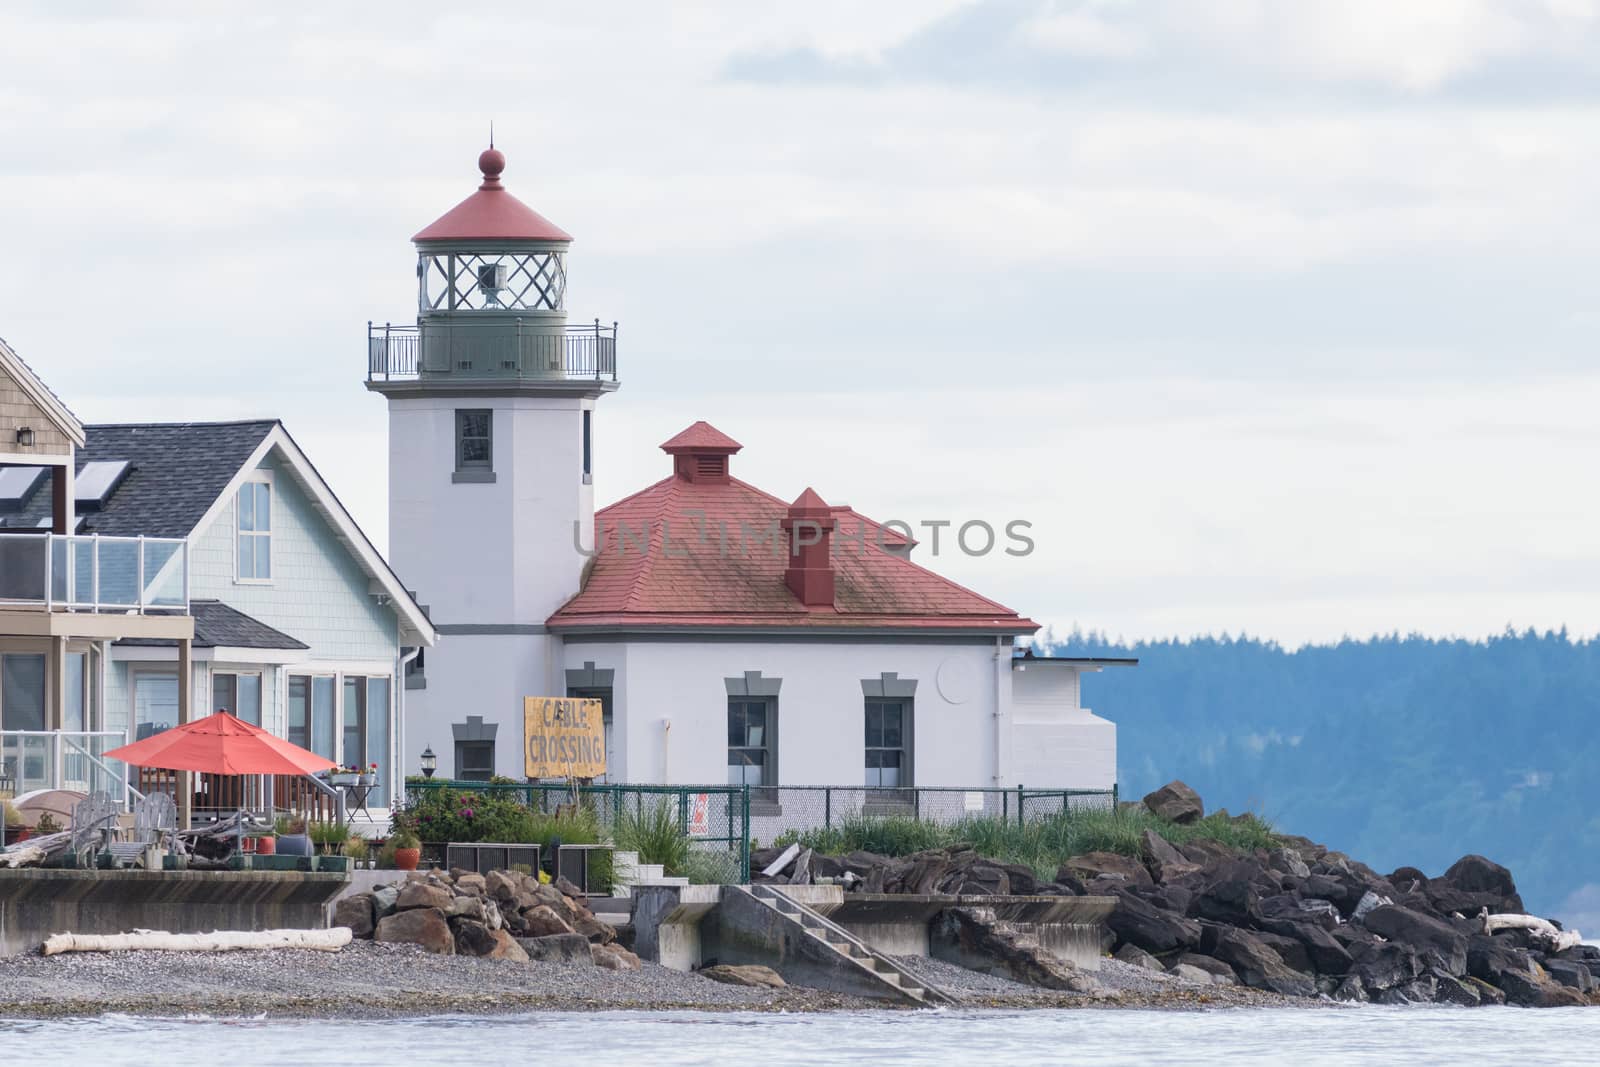 Alki Point Lighthouse on Cloudy Day by cestes001